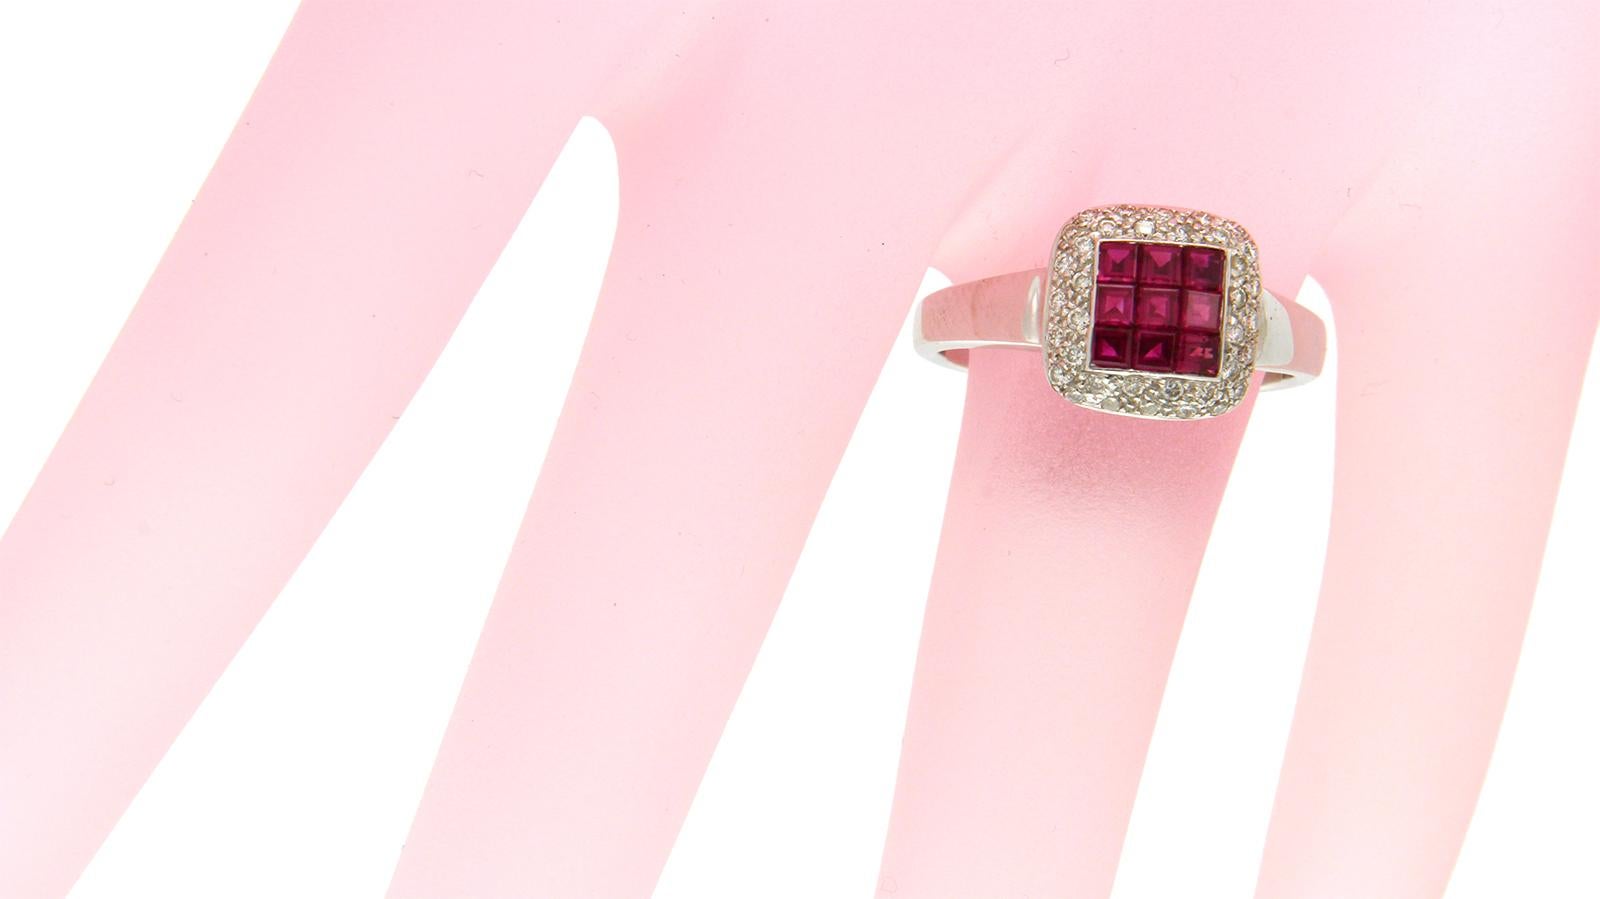 Type: Ring
Top:10 mm
Band Width: 2.7 mm
Metal: White Gold
Metal Purity: 18K
Size:6 to 9
Hallmarks: 18K
Total Weight: 4.4 Grams
Stone Type: 1.16 Natural Ruby and 0.32 Ct VS2 G Diamonds
Condition: New
Stock Number: BL12
..

Please Message Us for the